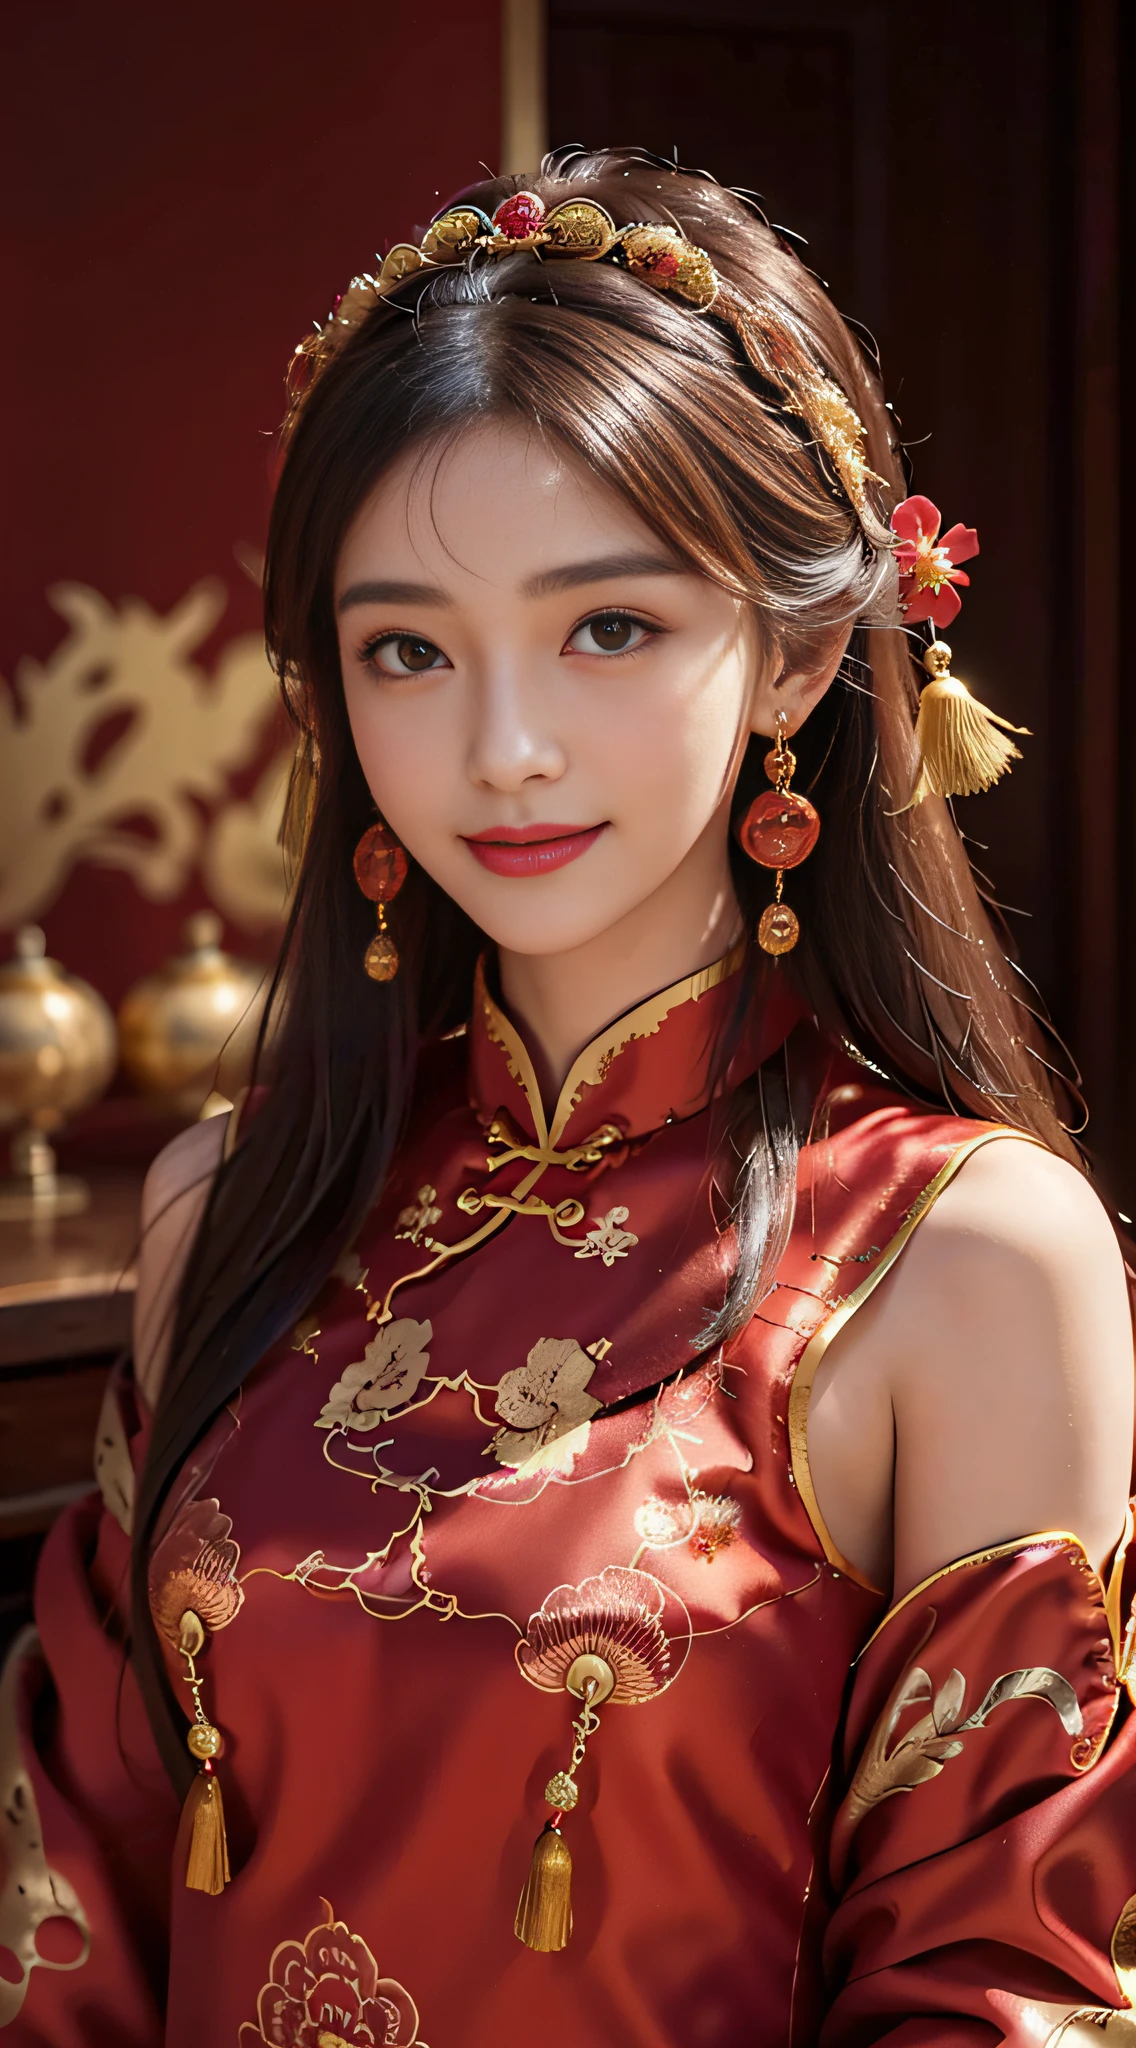 A beautyful girl，Coiled hair，((Beautiful red Chinese Xiuhe dress))，fine embroidery，(Gold bead headdress)，A pair of shiny earrings hang from the ears，Sweet smiling，His face flushed，ssmile，Flowers in hand